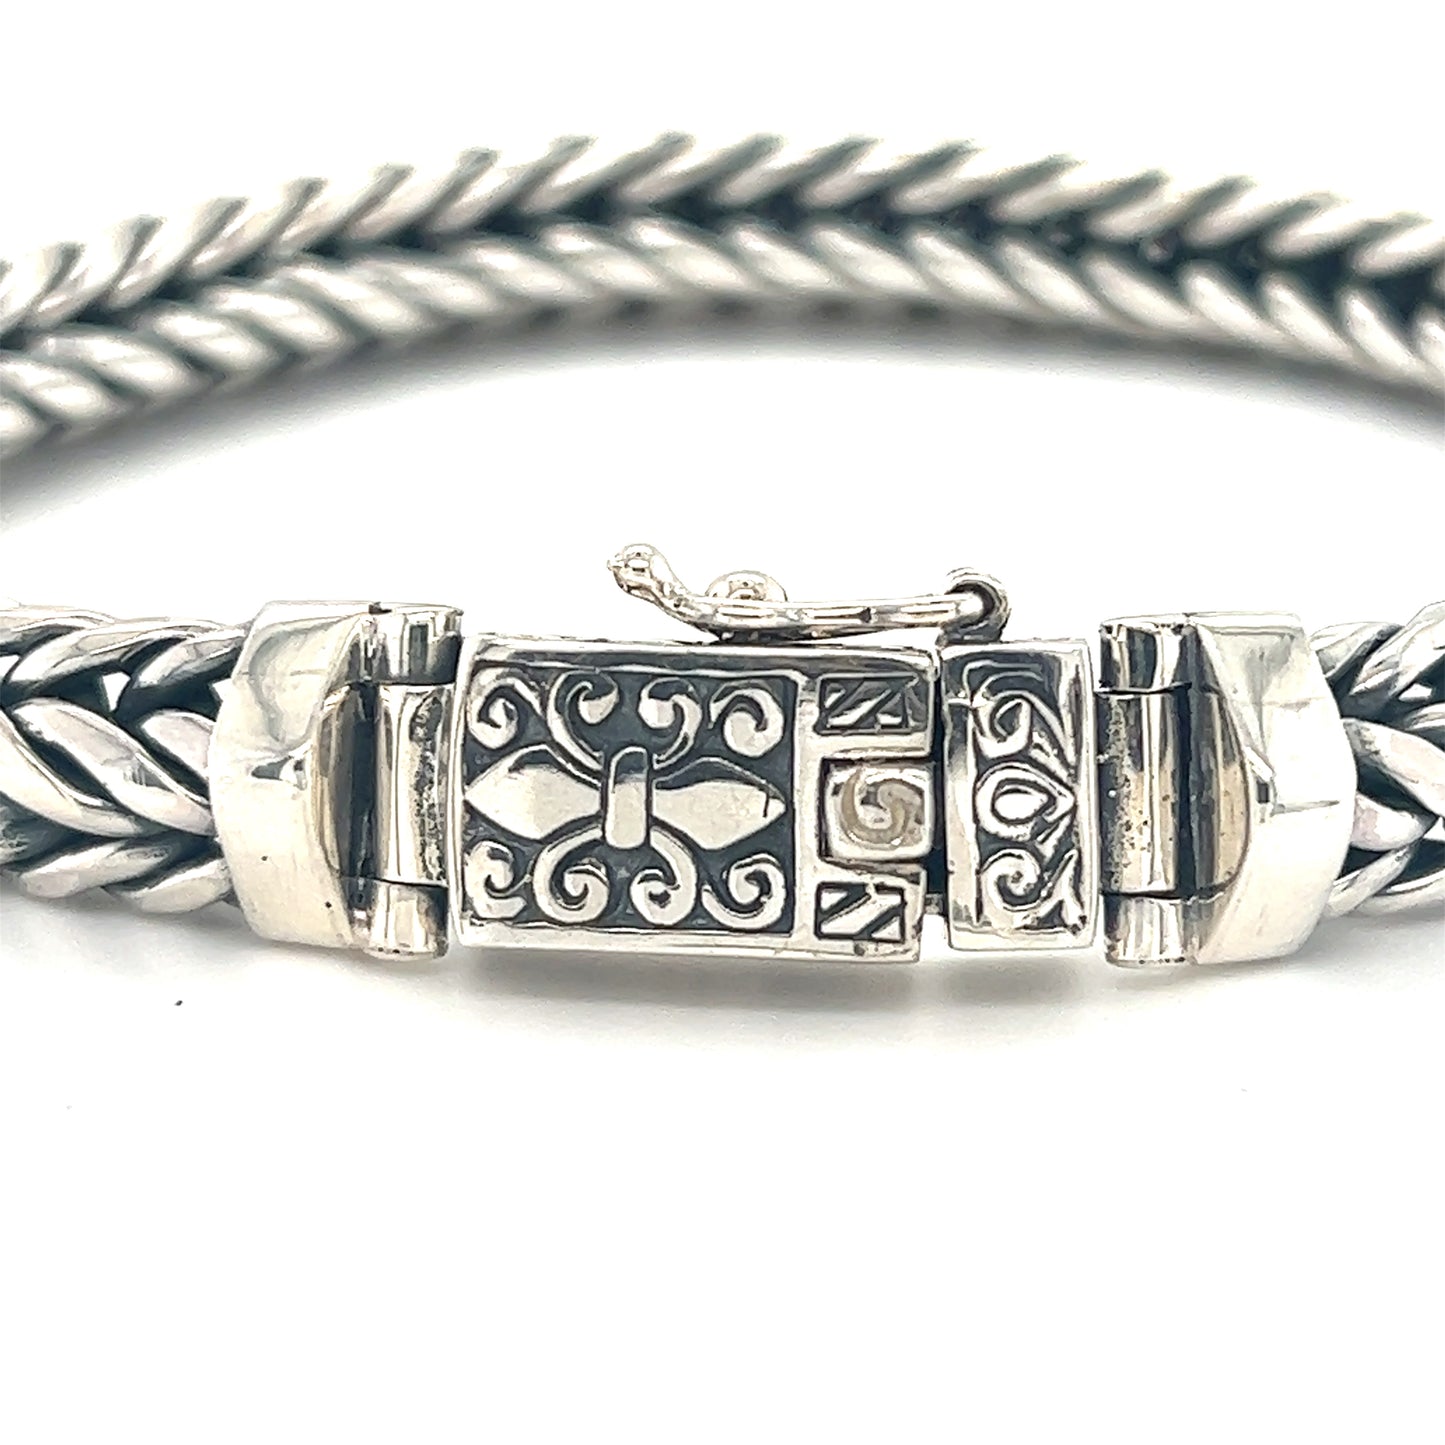 A Super Silver Heavy Braided Bracelet crafted from .925 Sterling Silver, featuring an ornate clasp.